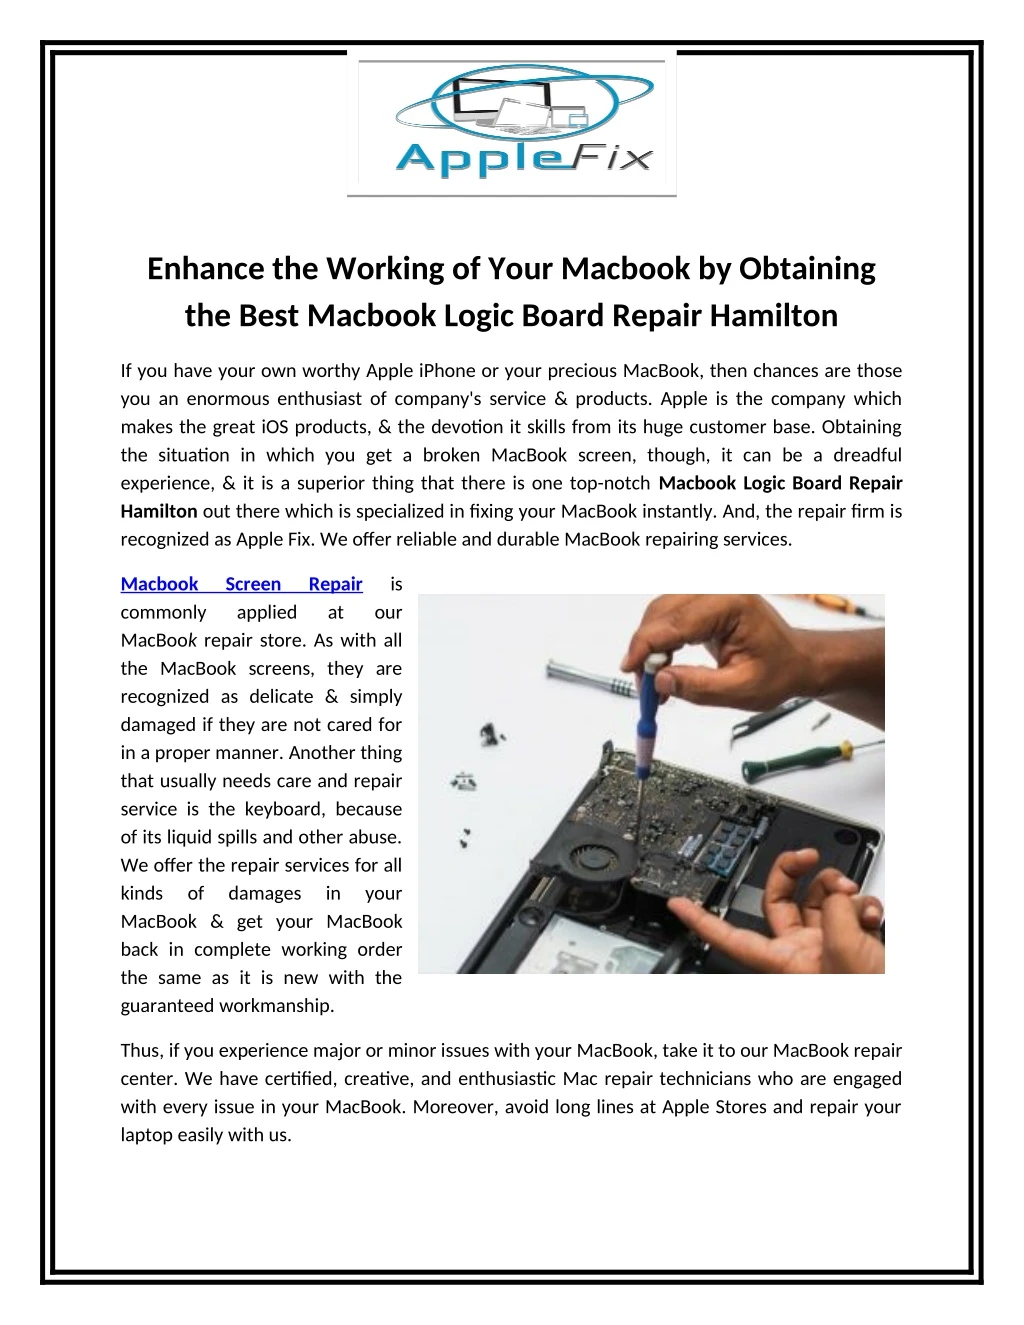 enhance the working of your macbook by obtaining